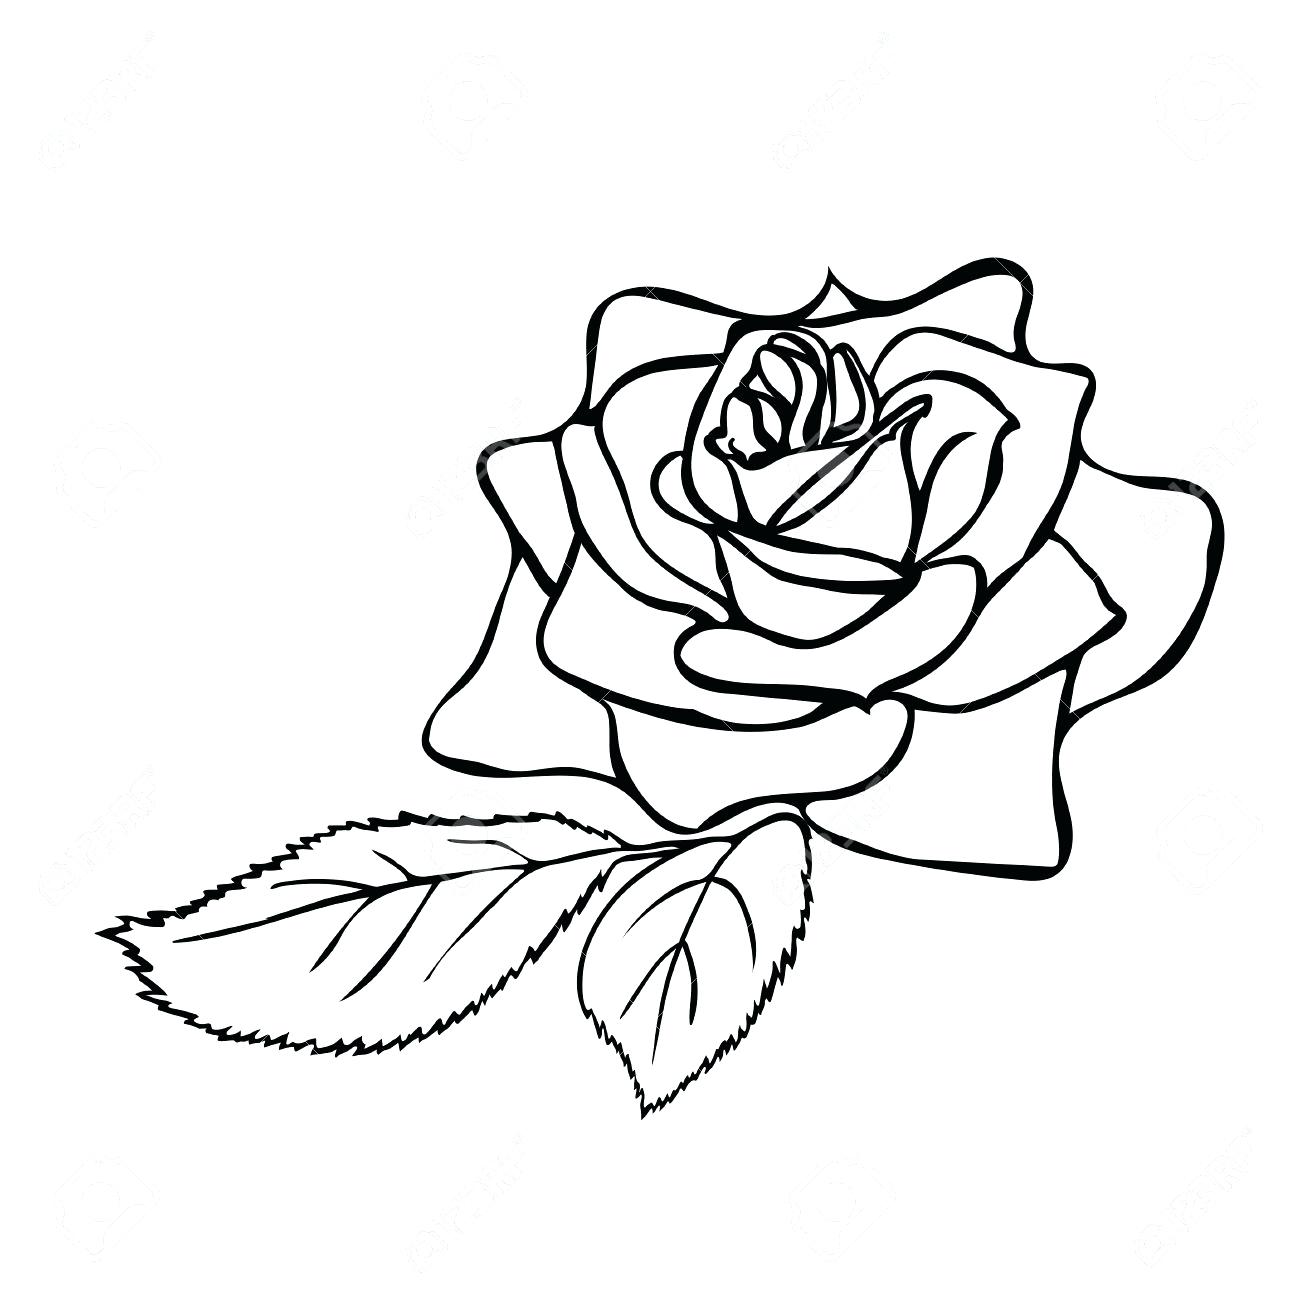 Rose Line Drawing | Free download on ClipArtMag